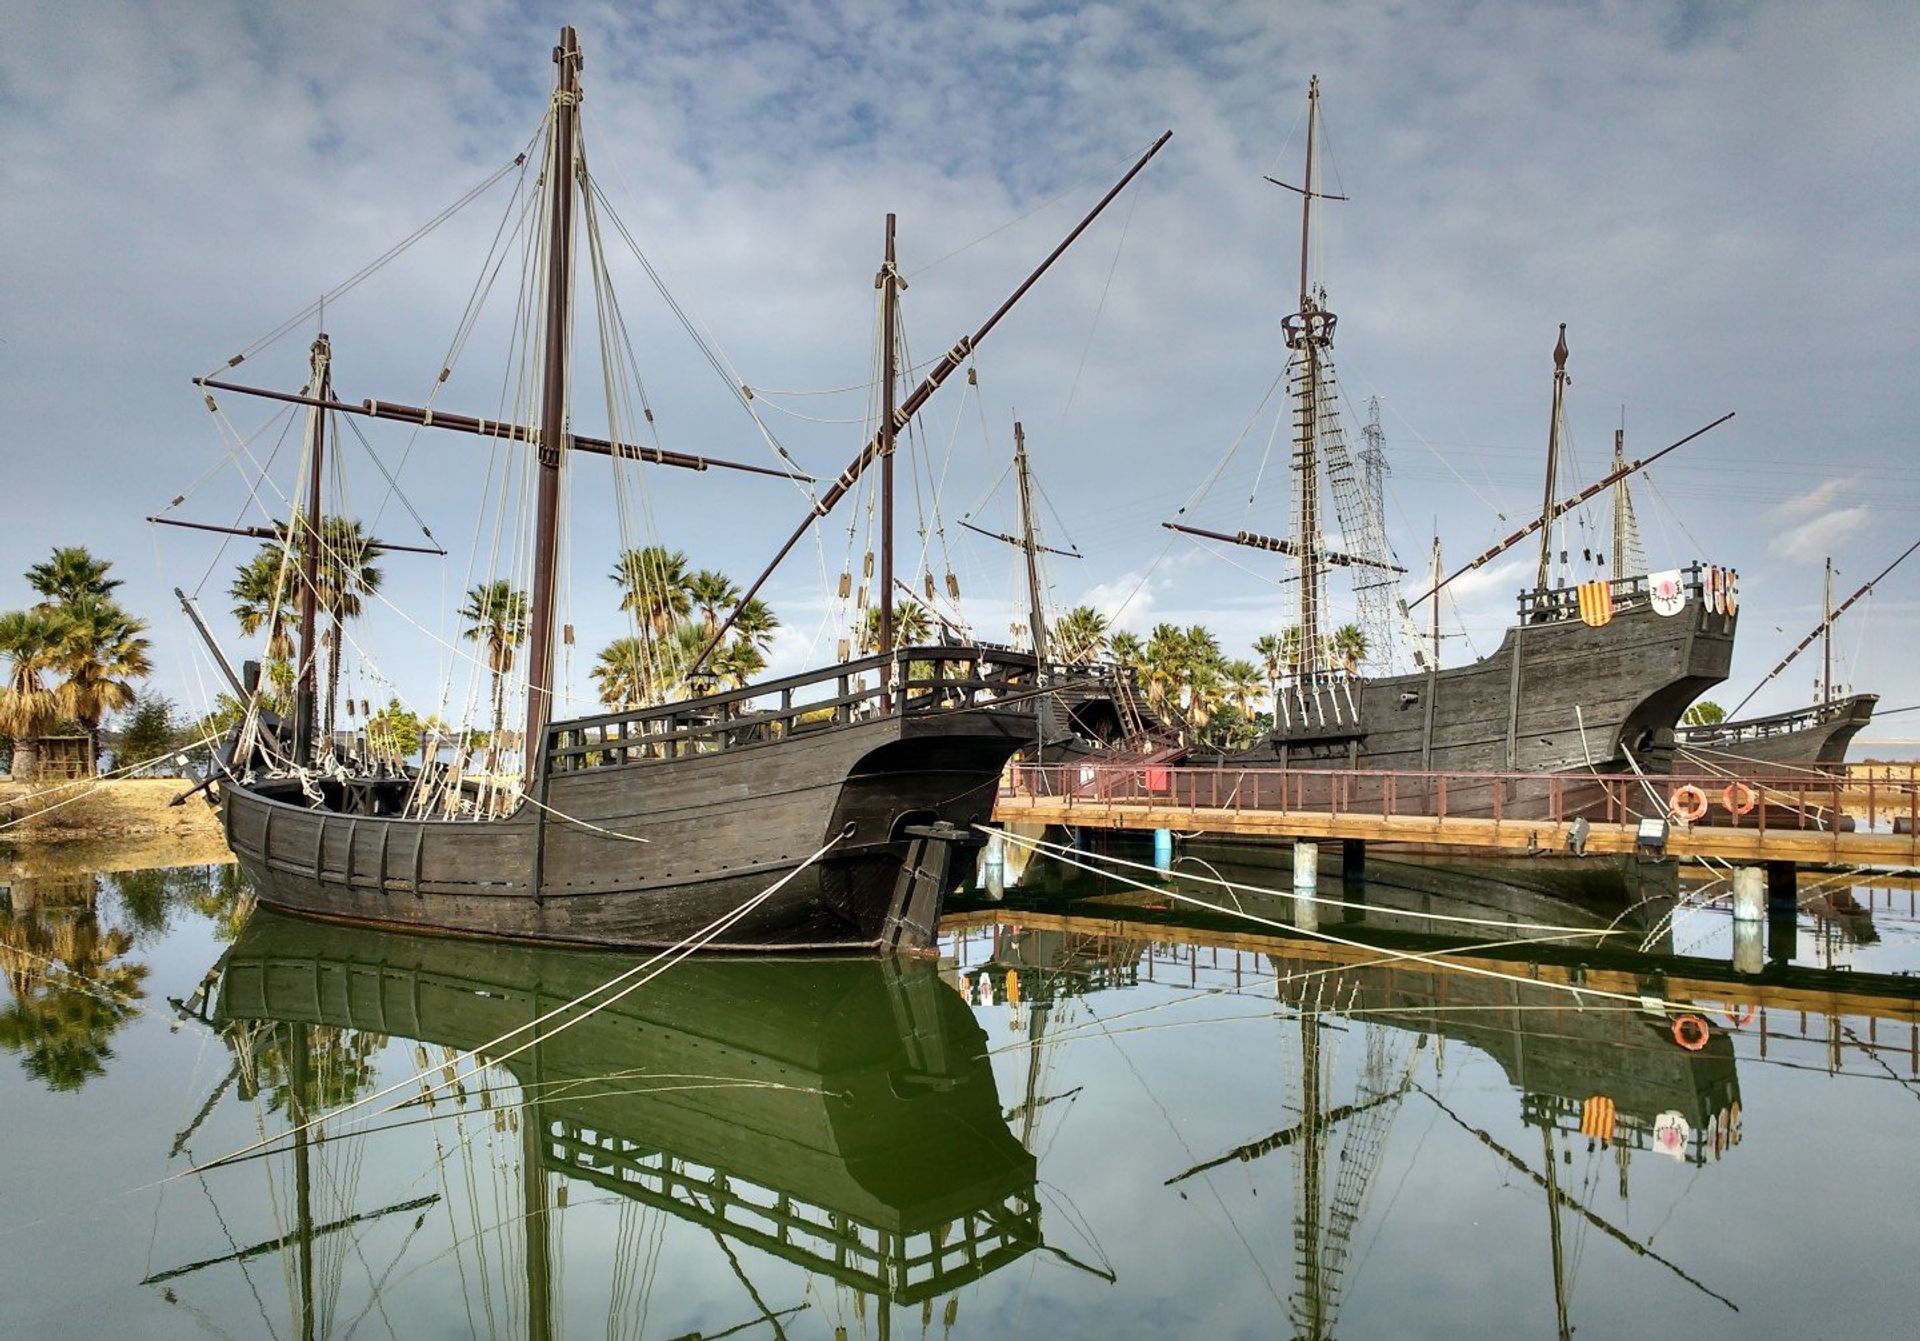 Huelva is the province from where Christopher Columbus set off on his first journey to the Americas in 1942